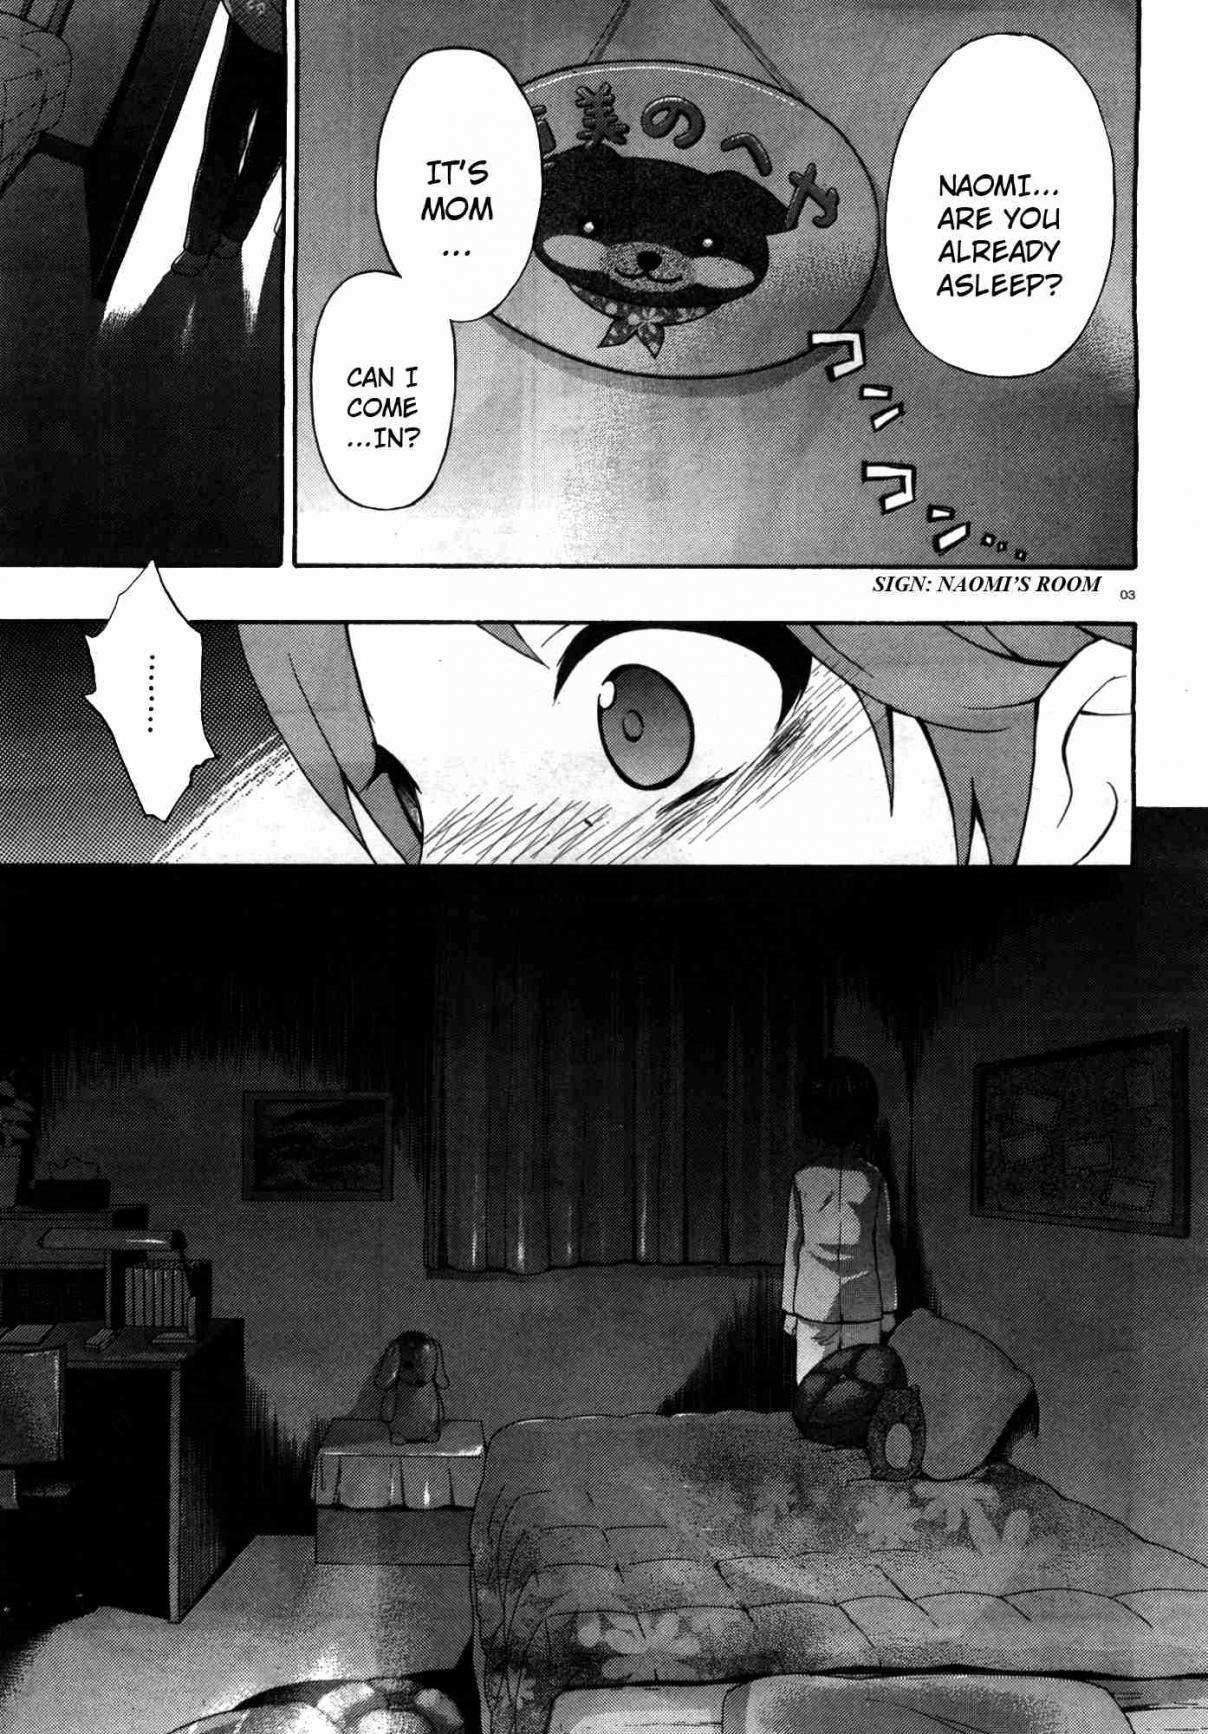 Corpse Party Book of Shadows Vol. 1 Ch. 0 Prologue